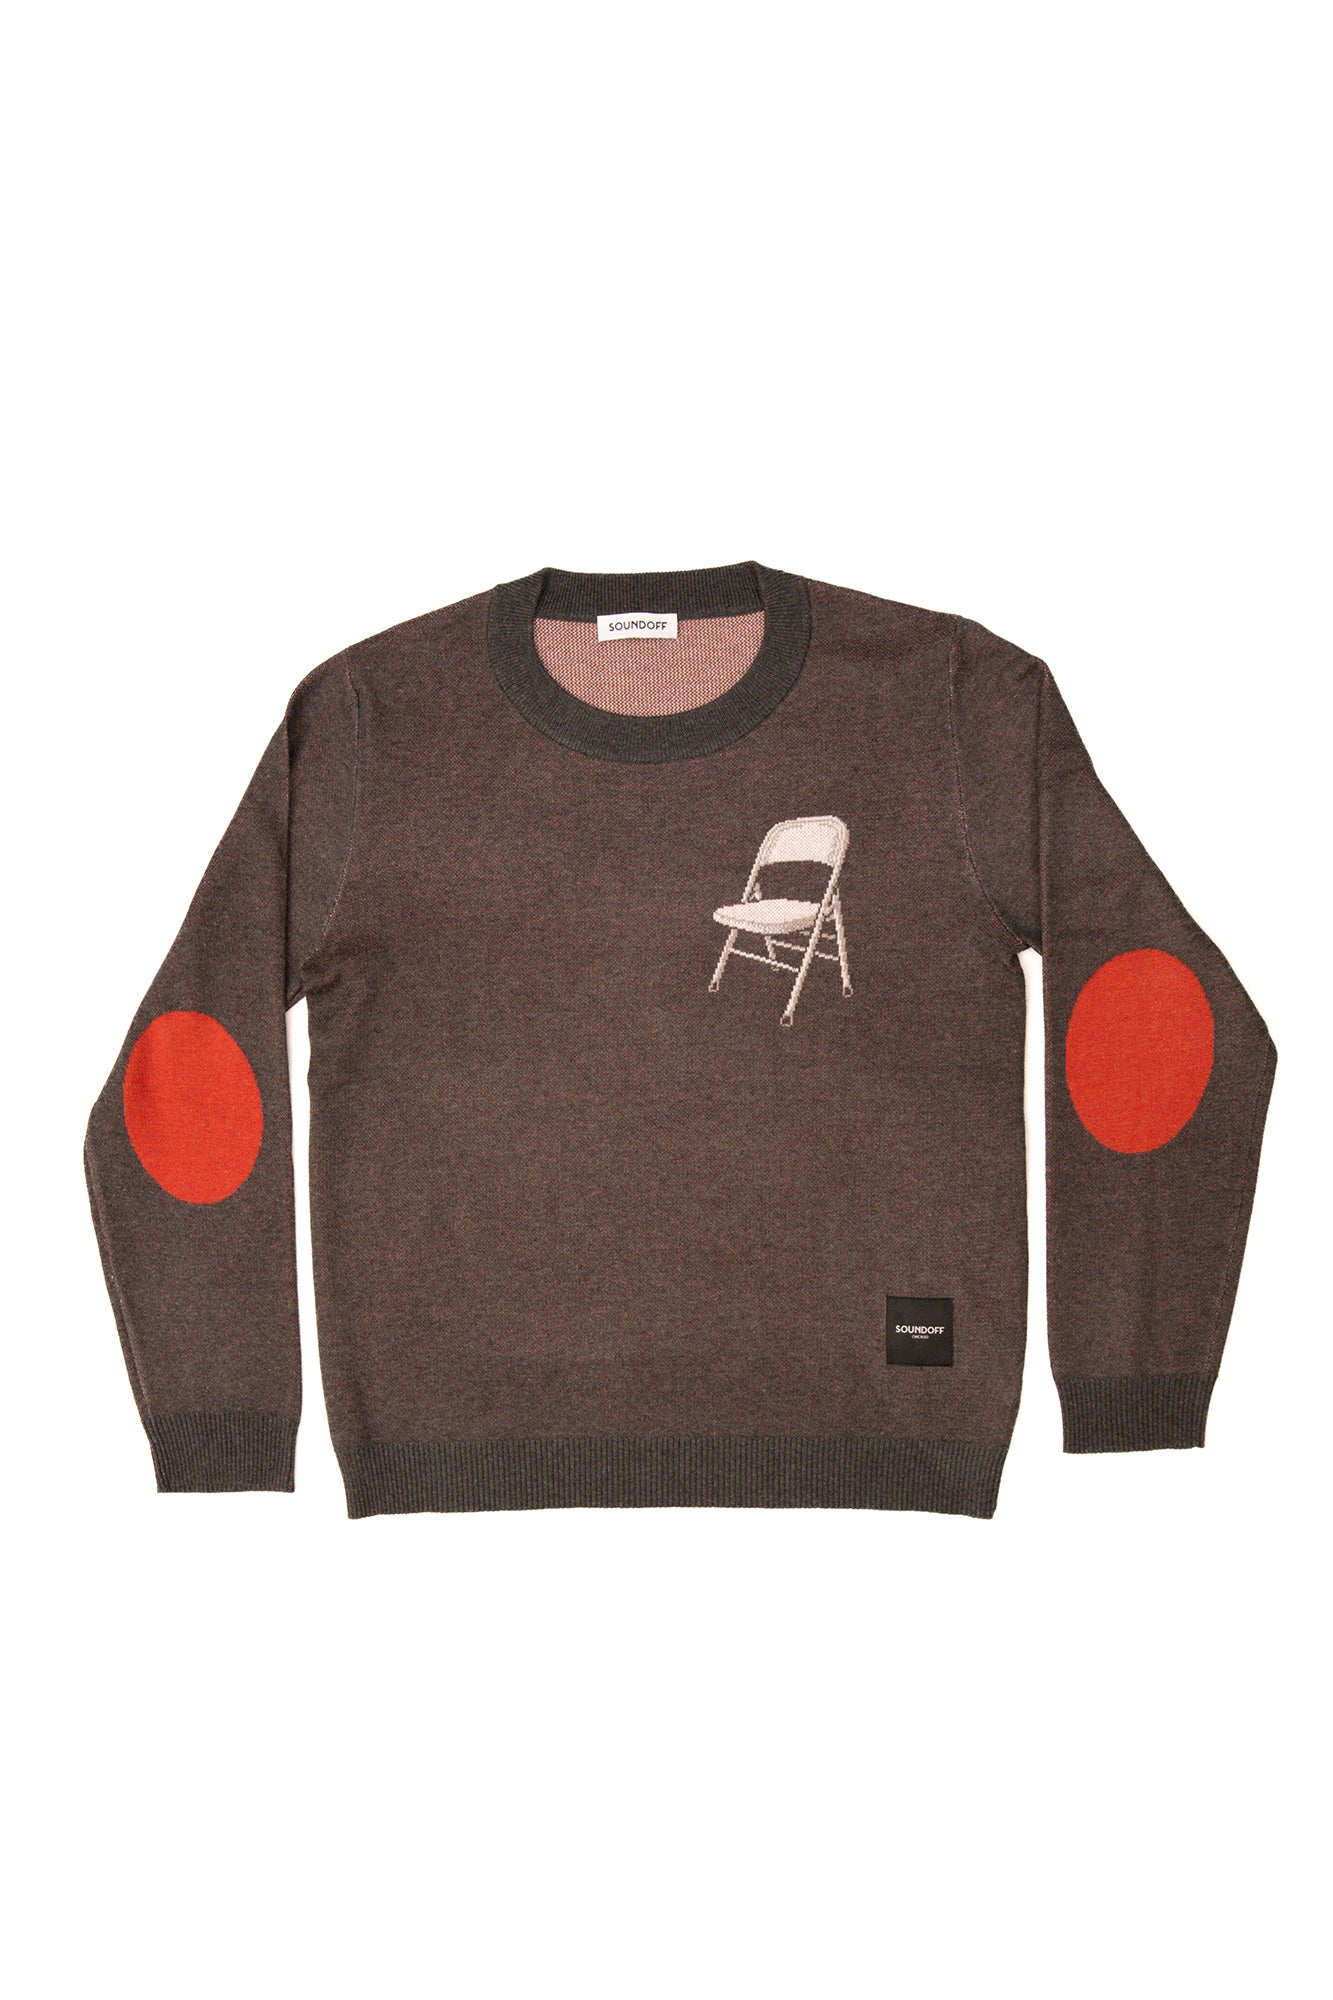 THE FOLDING CHAIR KNIT CREW; MADE TO ORDER